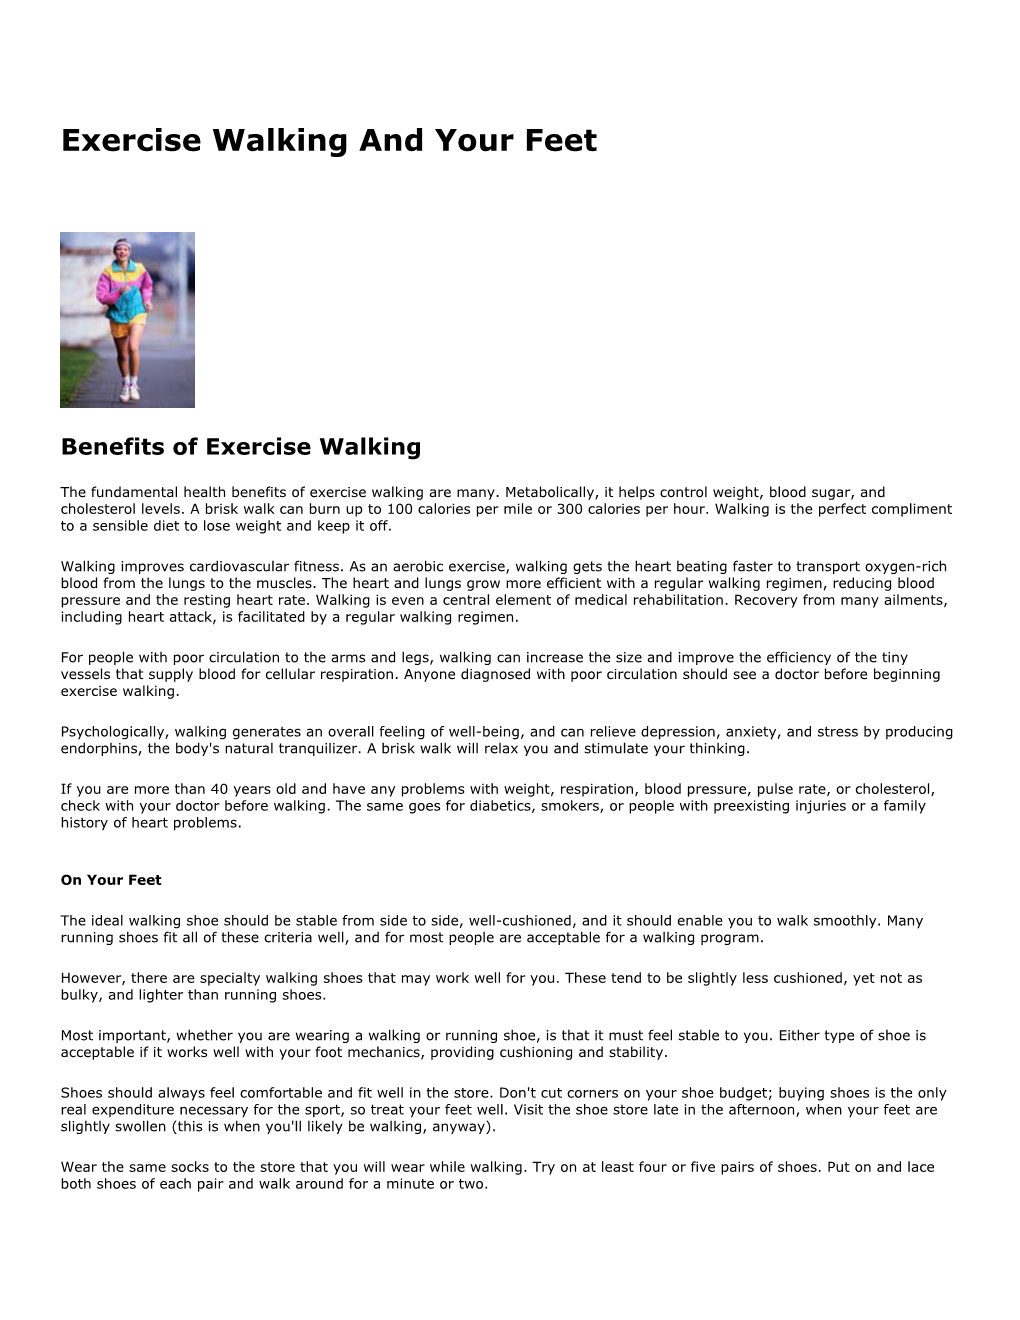 Exercise Walking and Your Feet